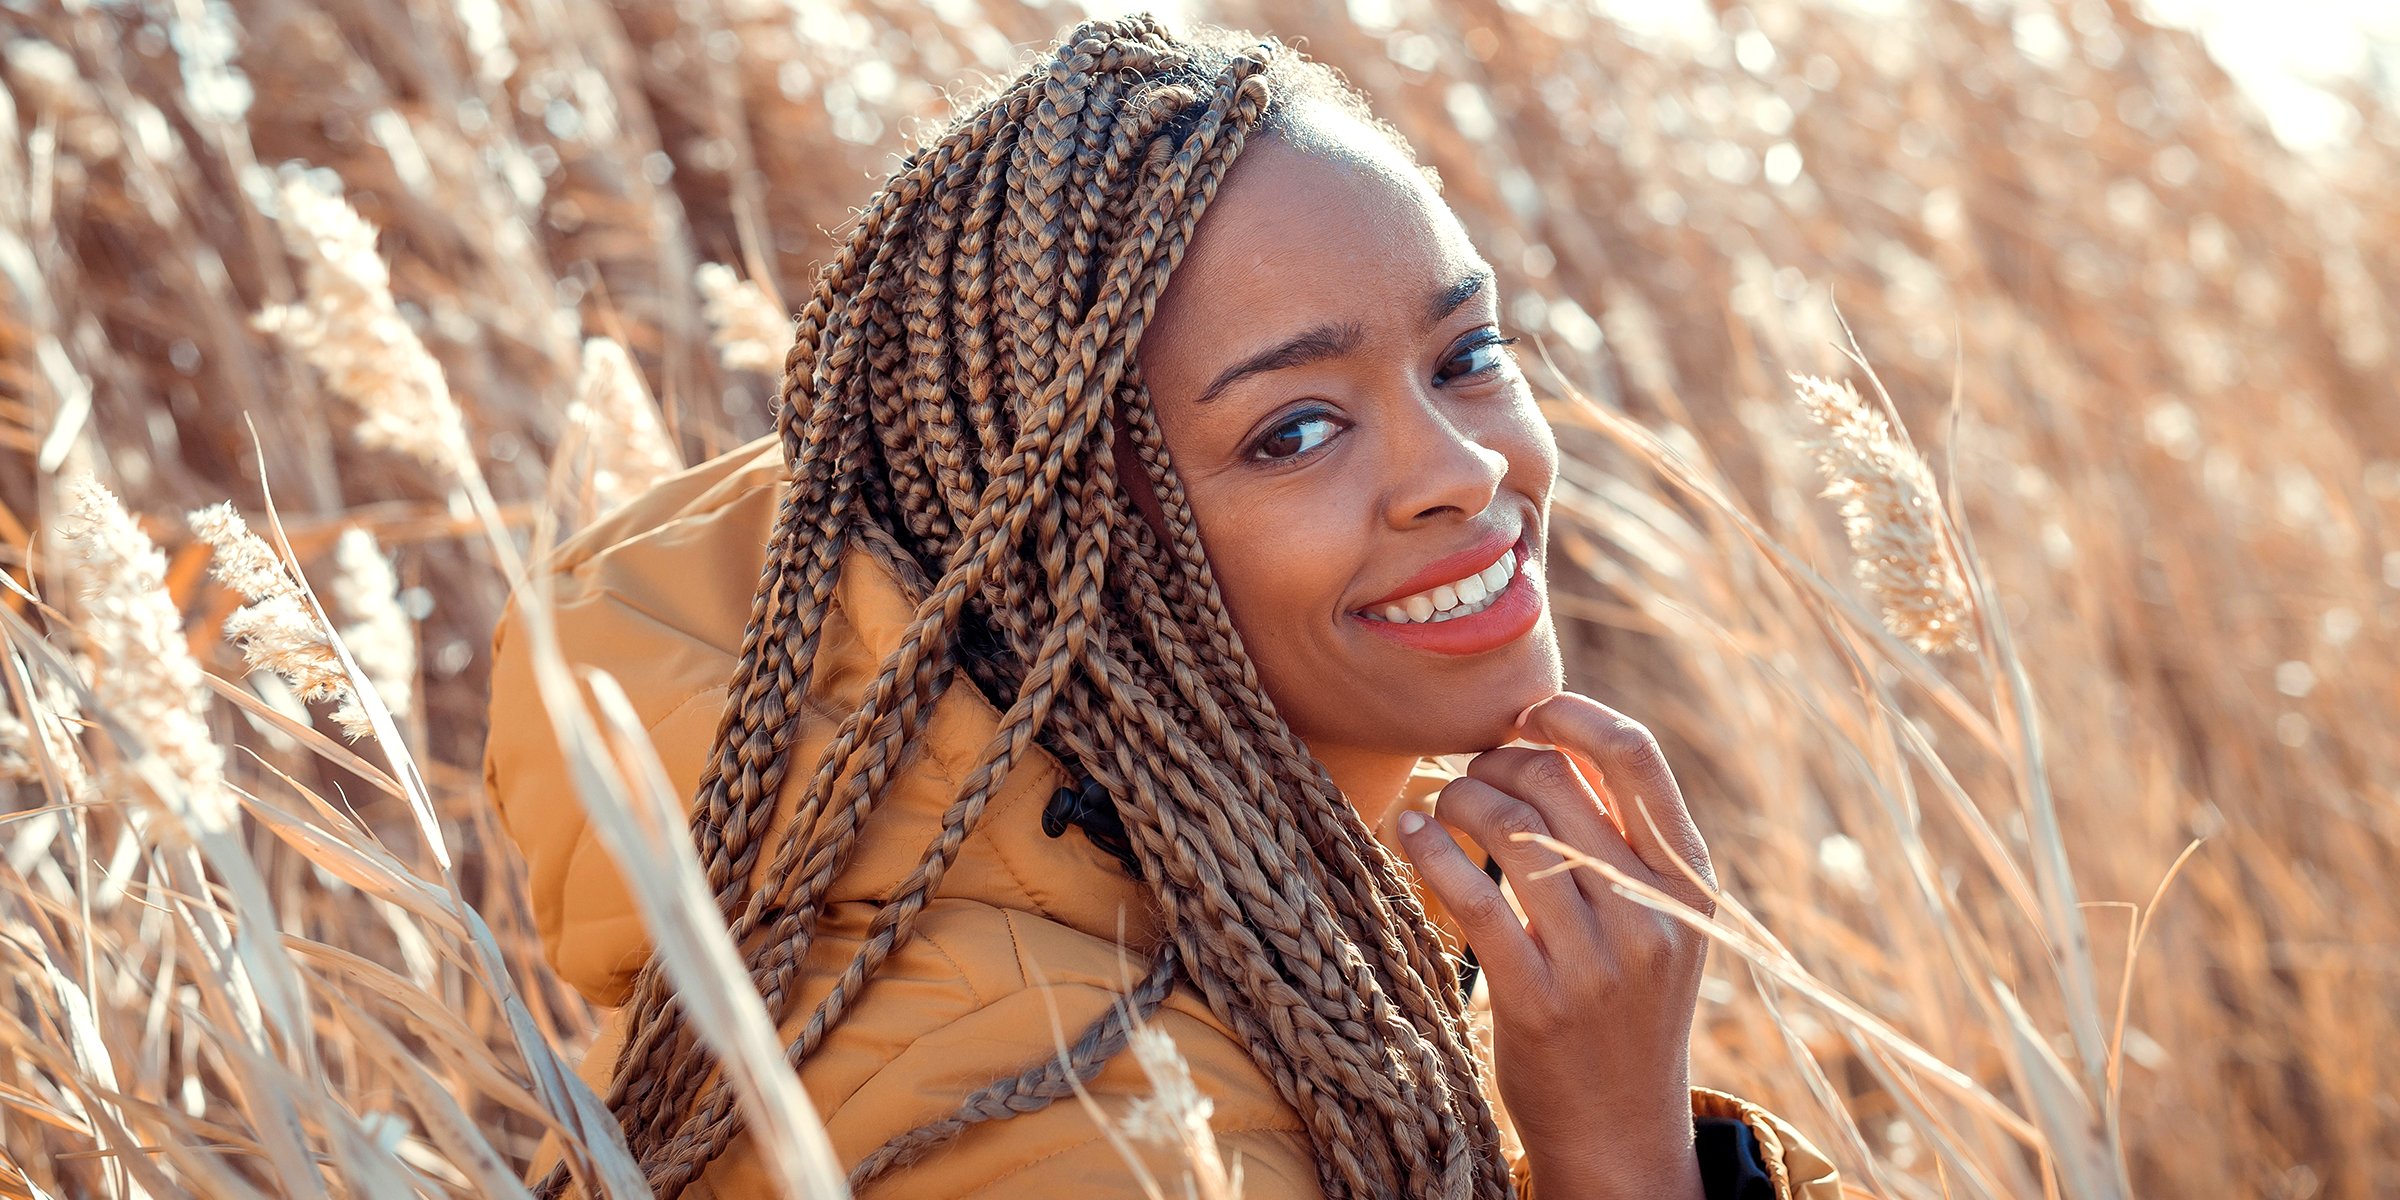 Woman with small box braids | Source: Shutterstock